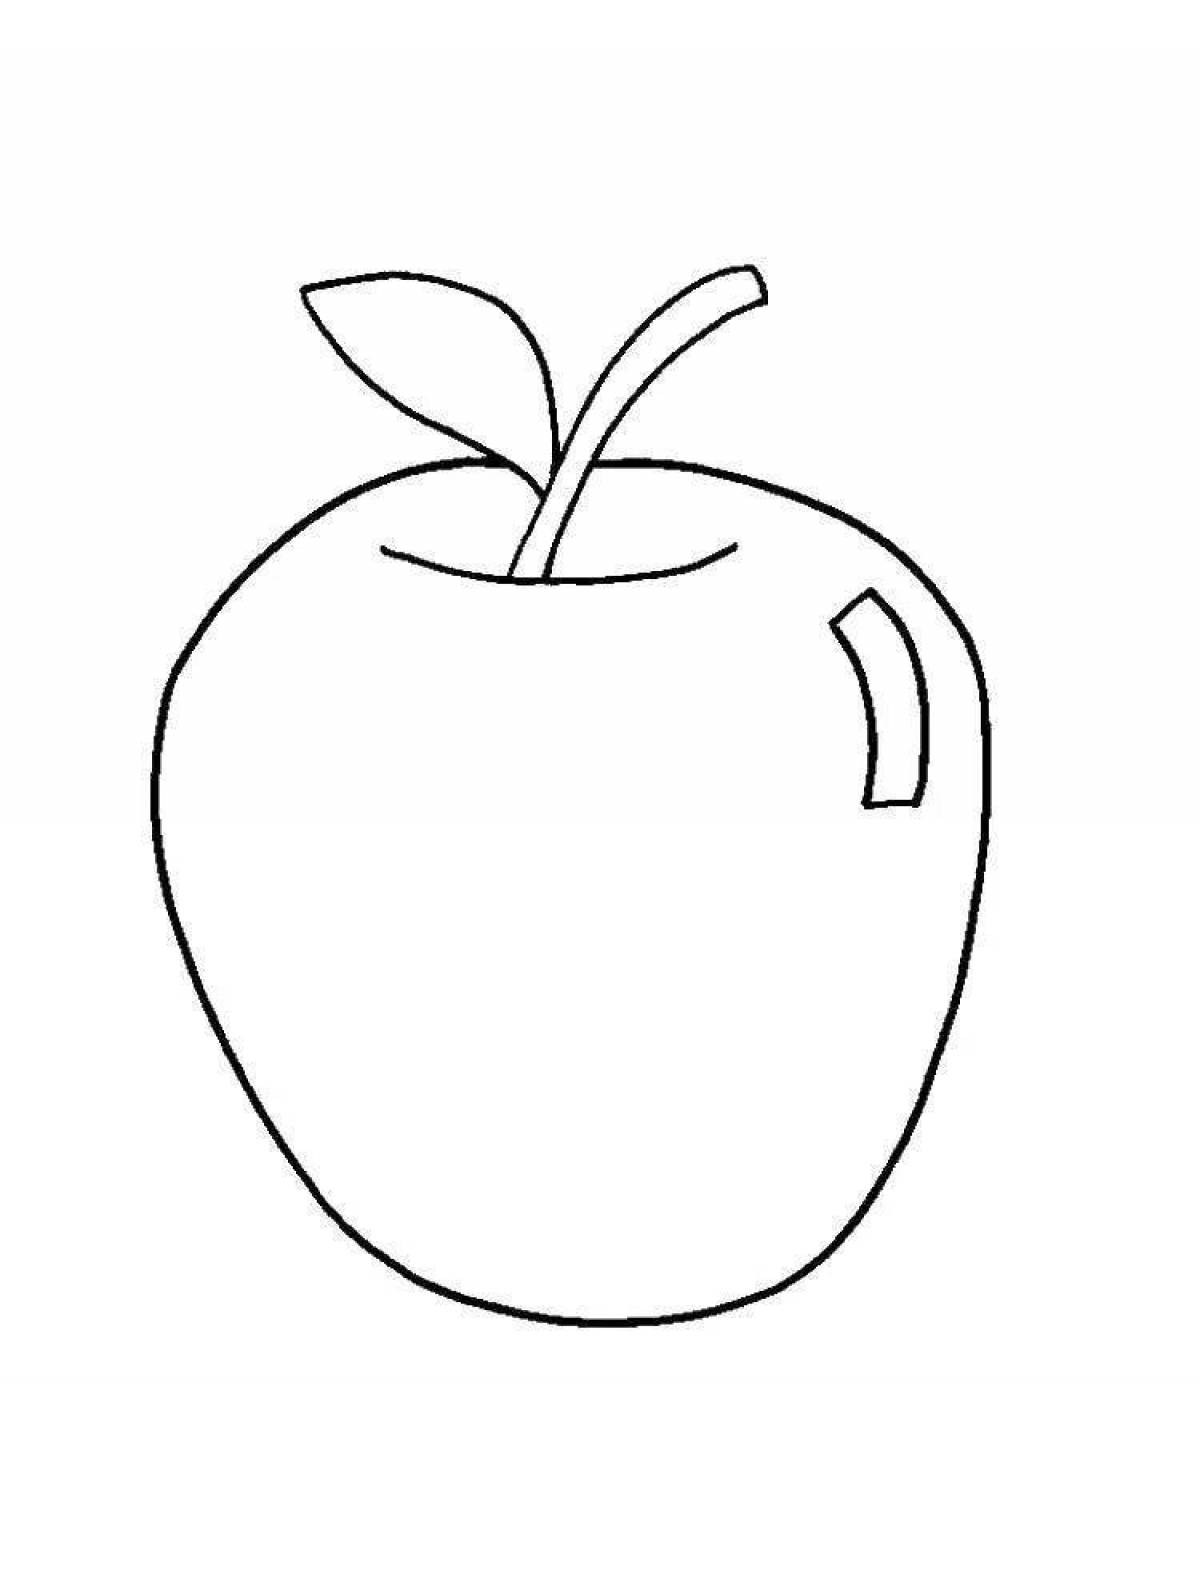 Fun apple and pear coloring book